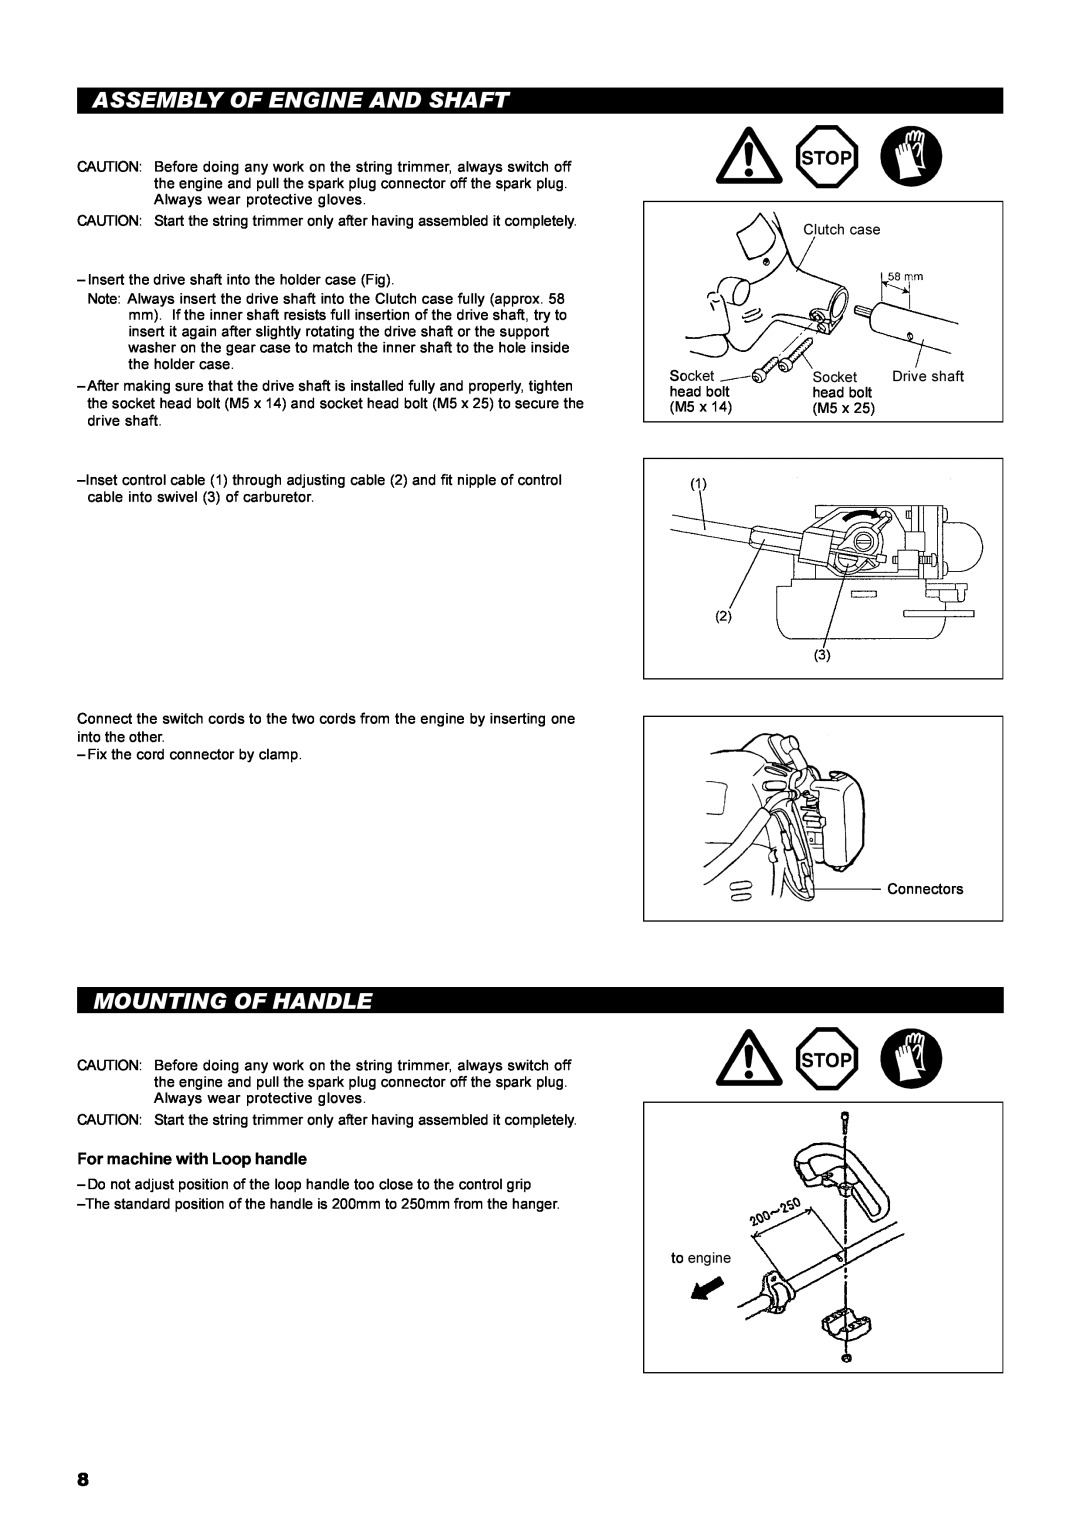 Dolmar MS-22C instruction manual Assembly Of Engine And Shaft, Mounting Of Handle, For machine with Loop handle 